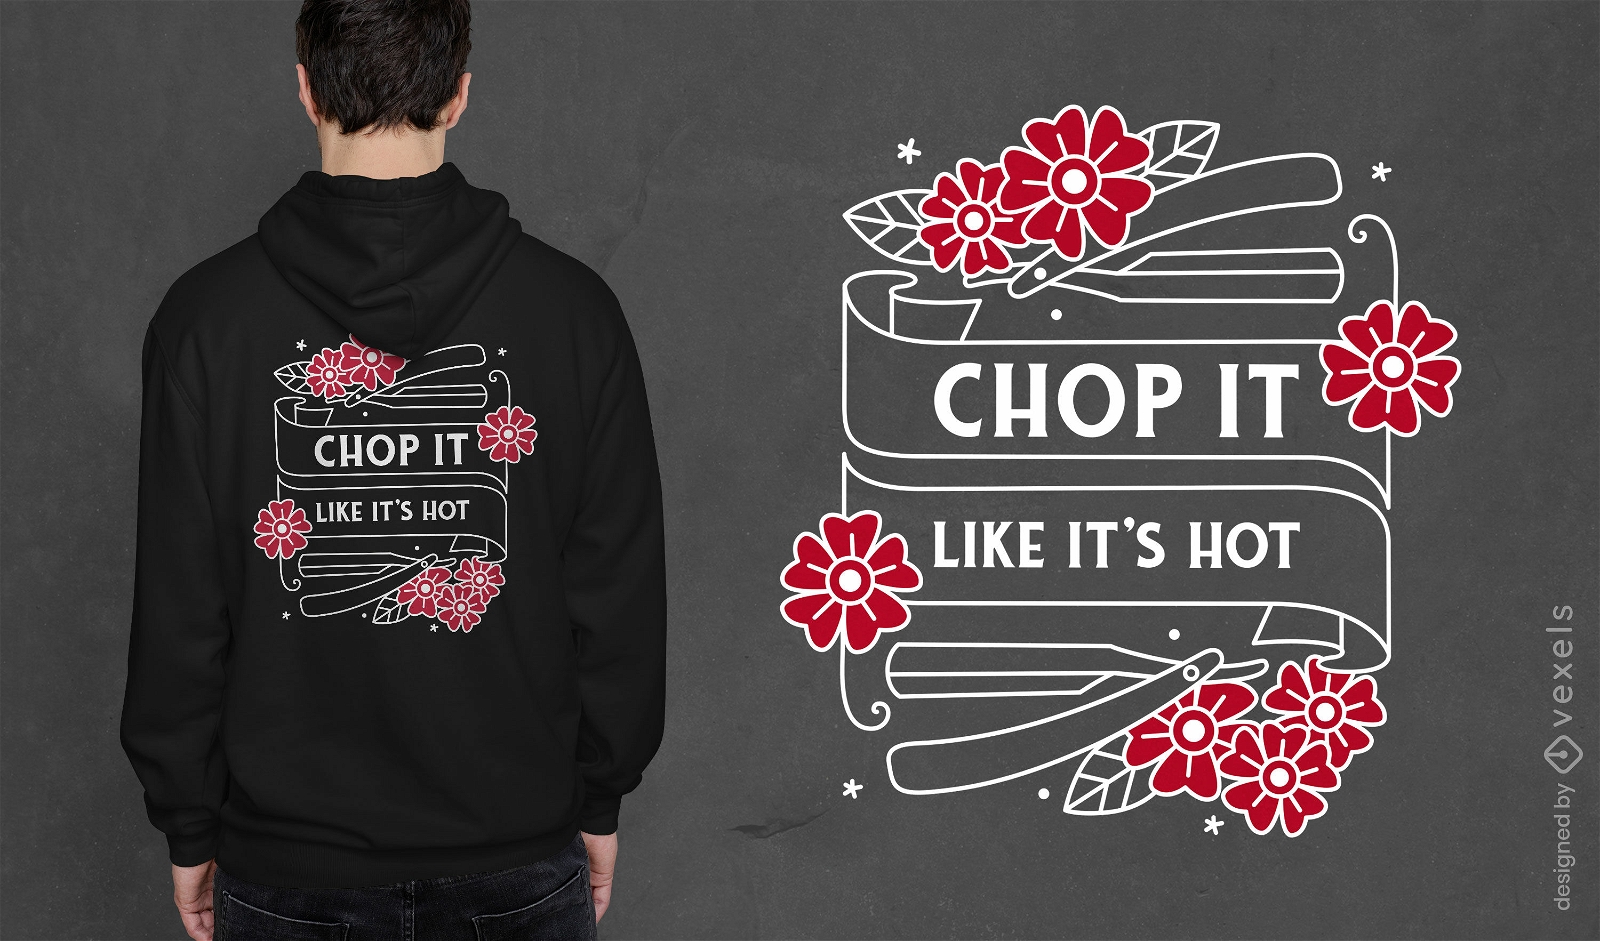 Chop it like it's hot hairstyle t-shirt design